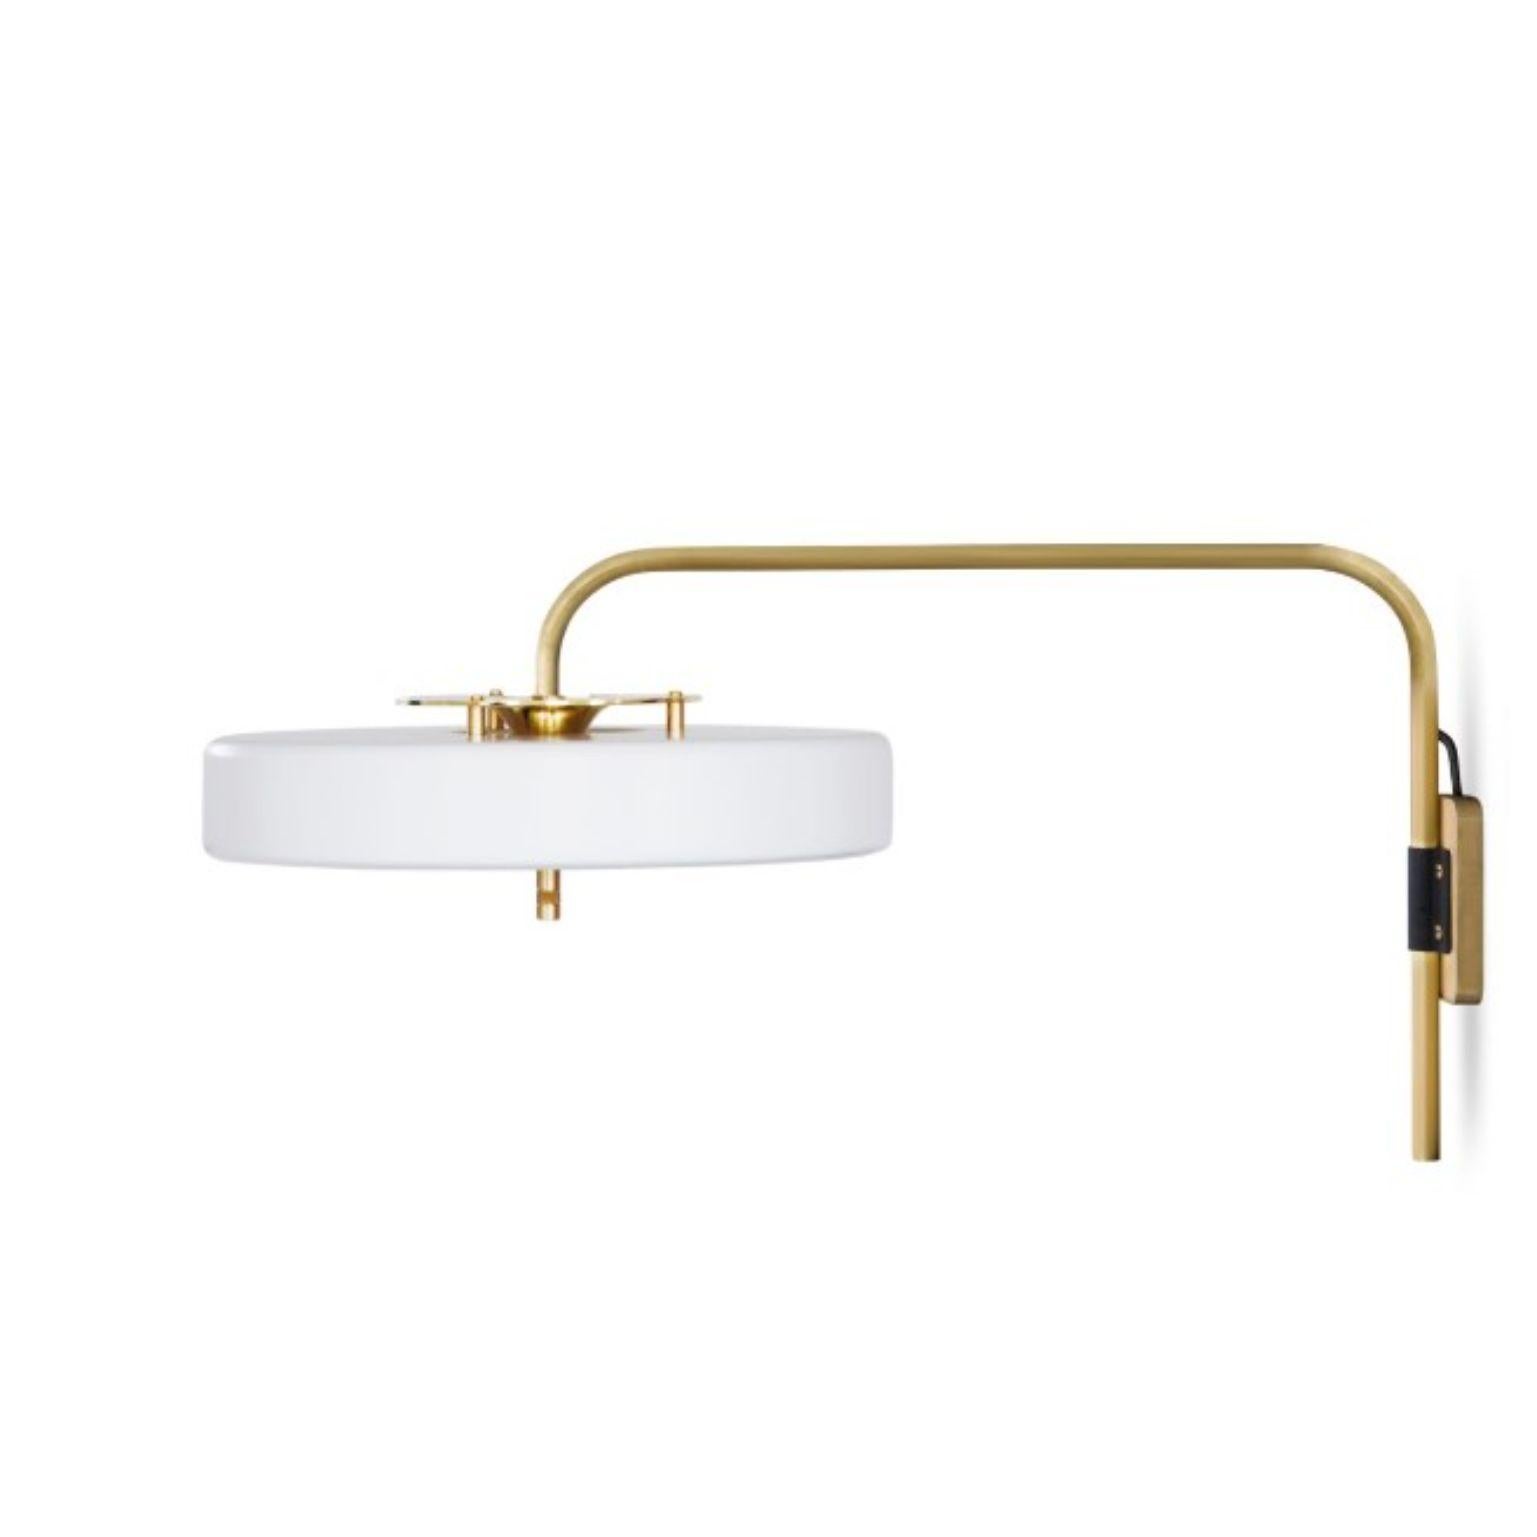 British Revolve Wall Light, Brushed Brass, White by Bert Frank For Sale